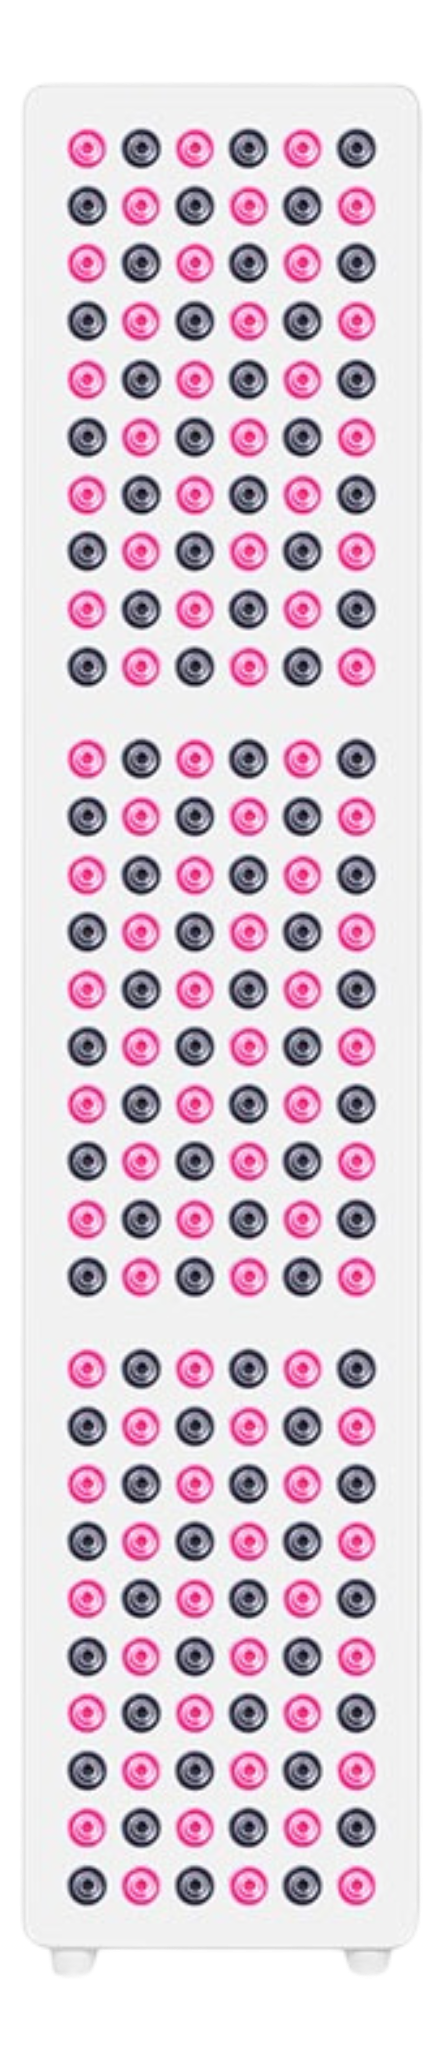 A vertical whiteboard with a grid of pink and black game pieces.